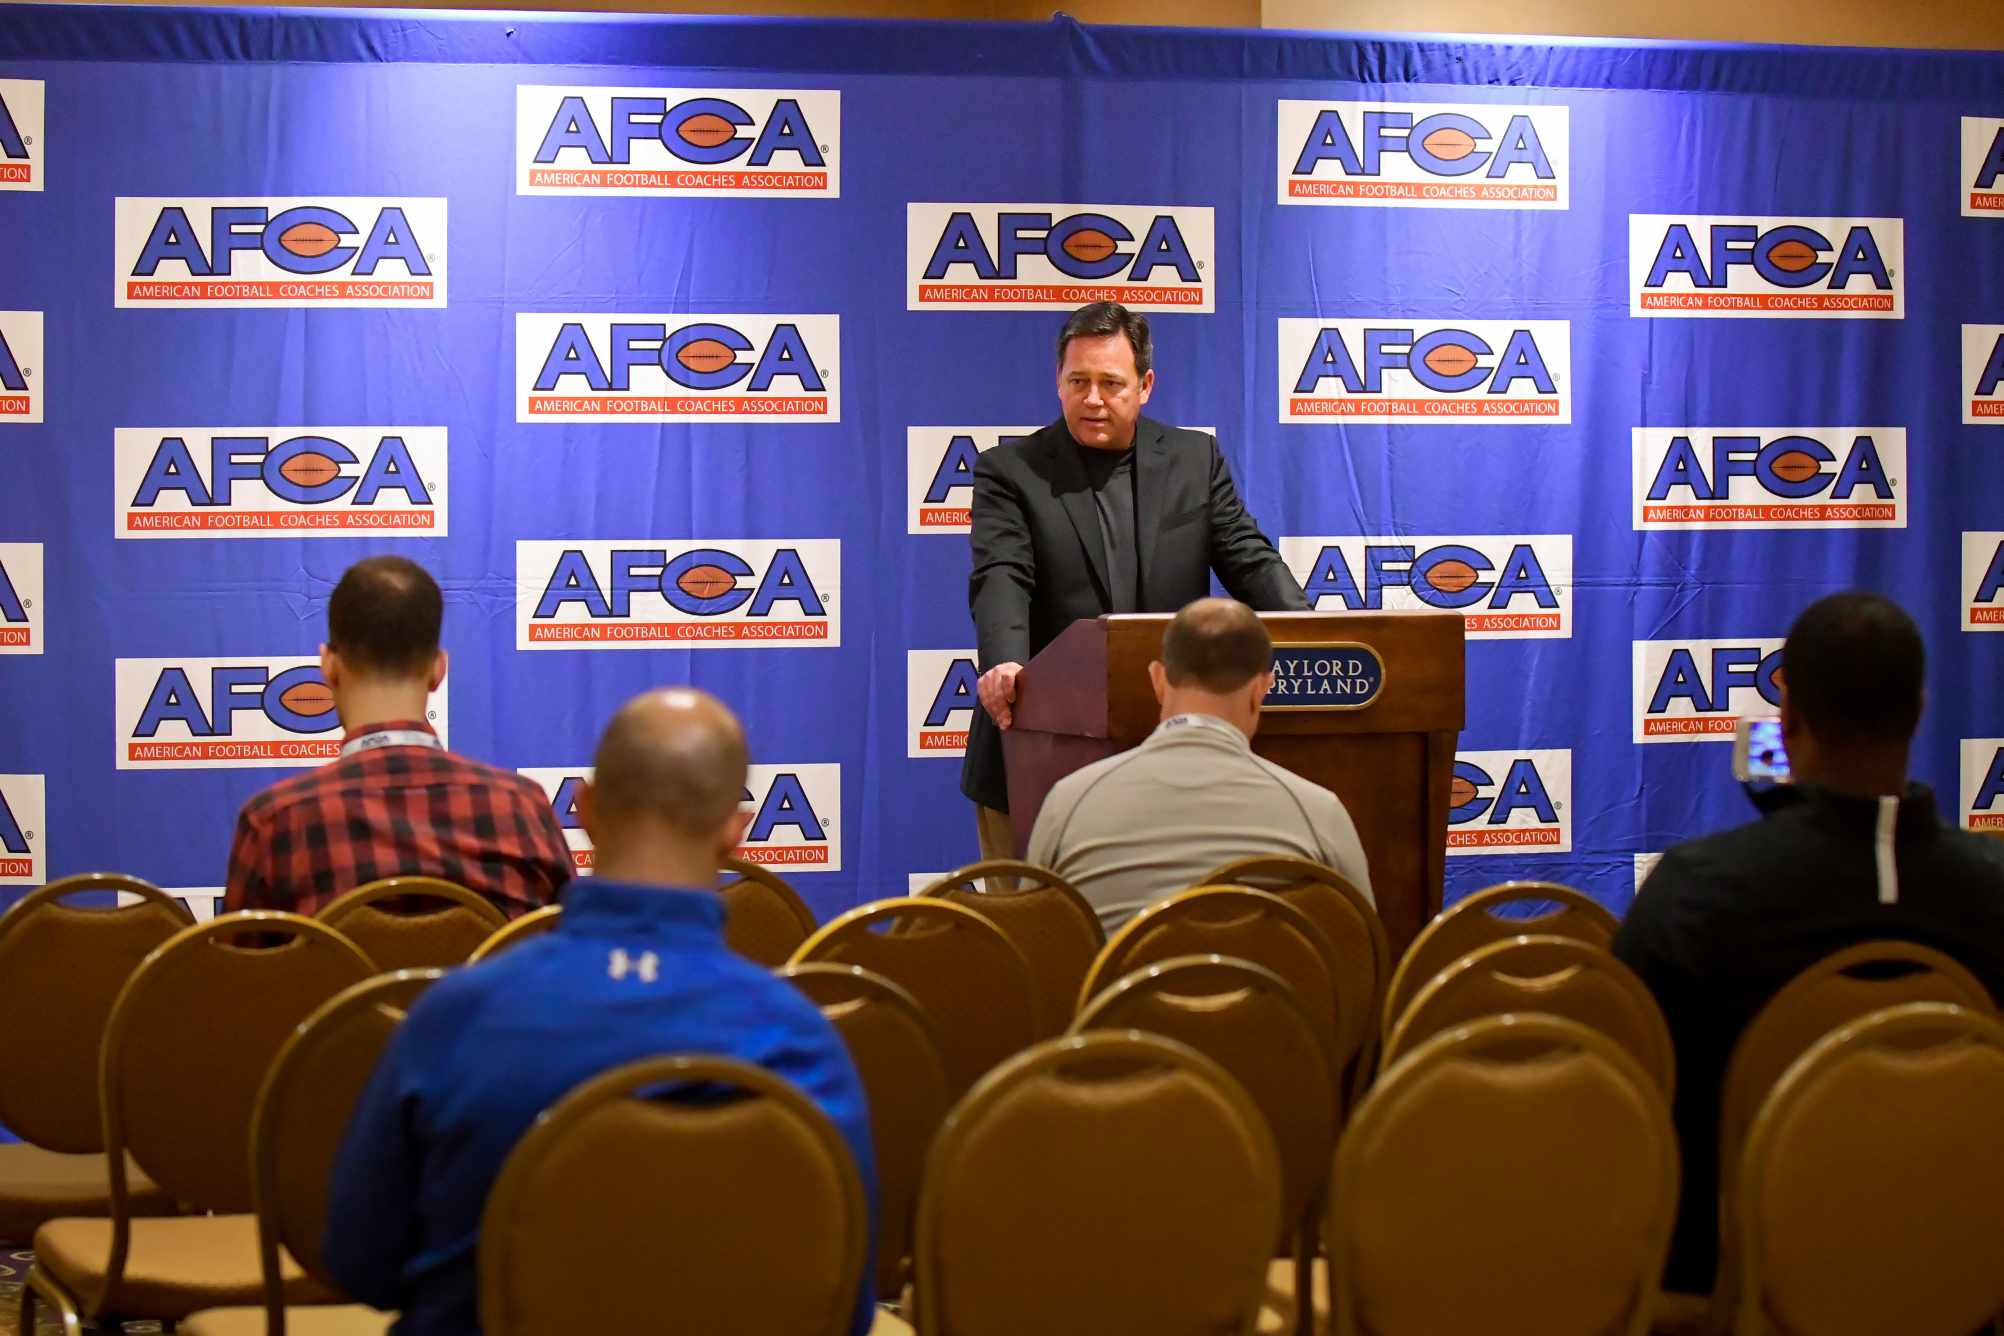 AFCA Statements After Coaches Meeting